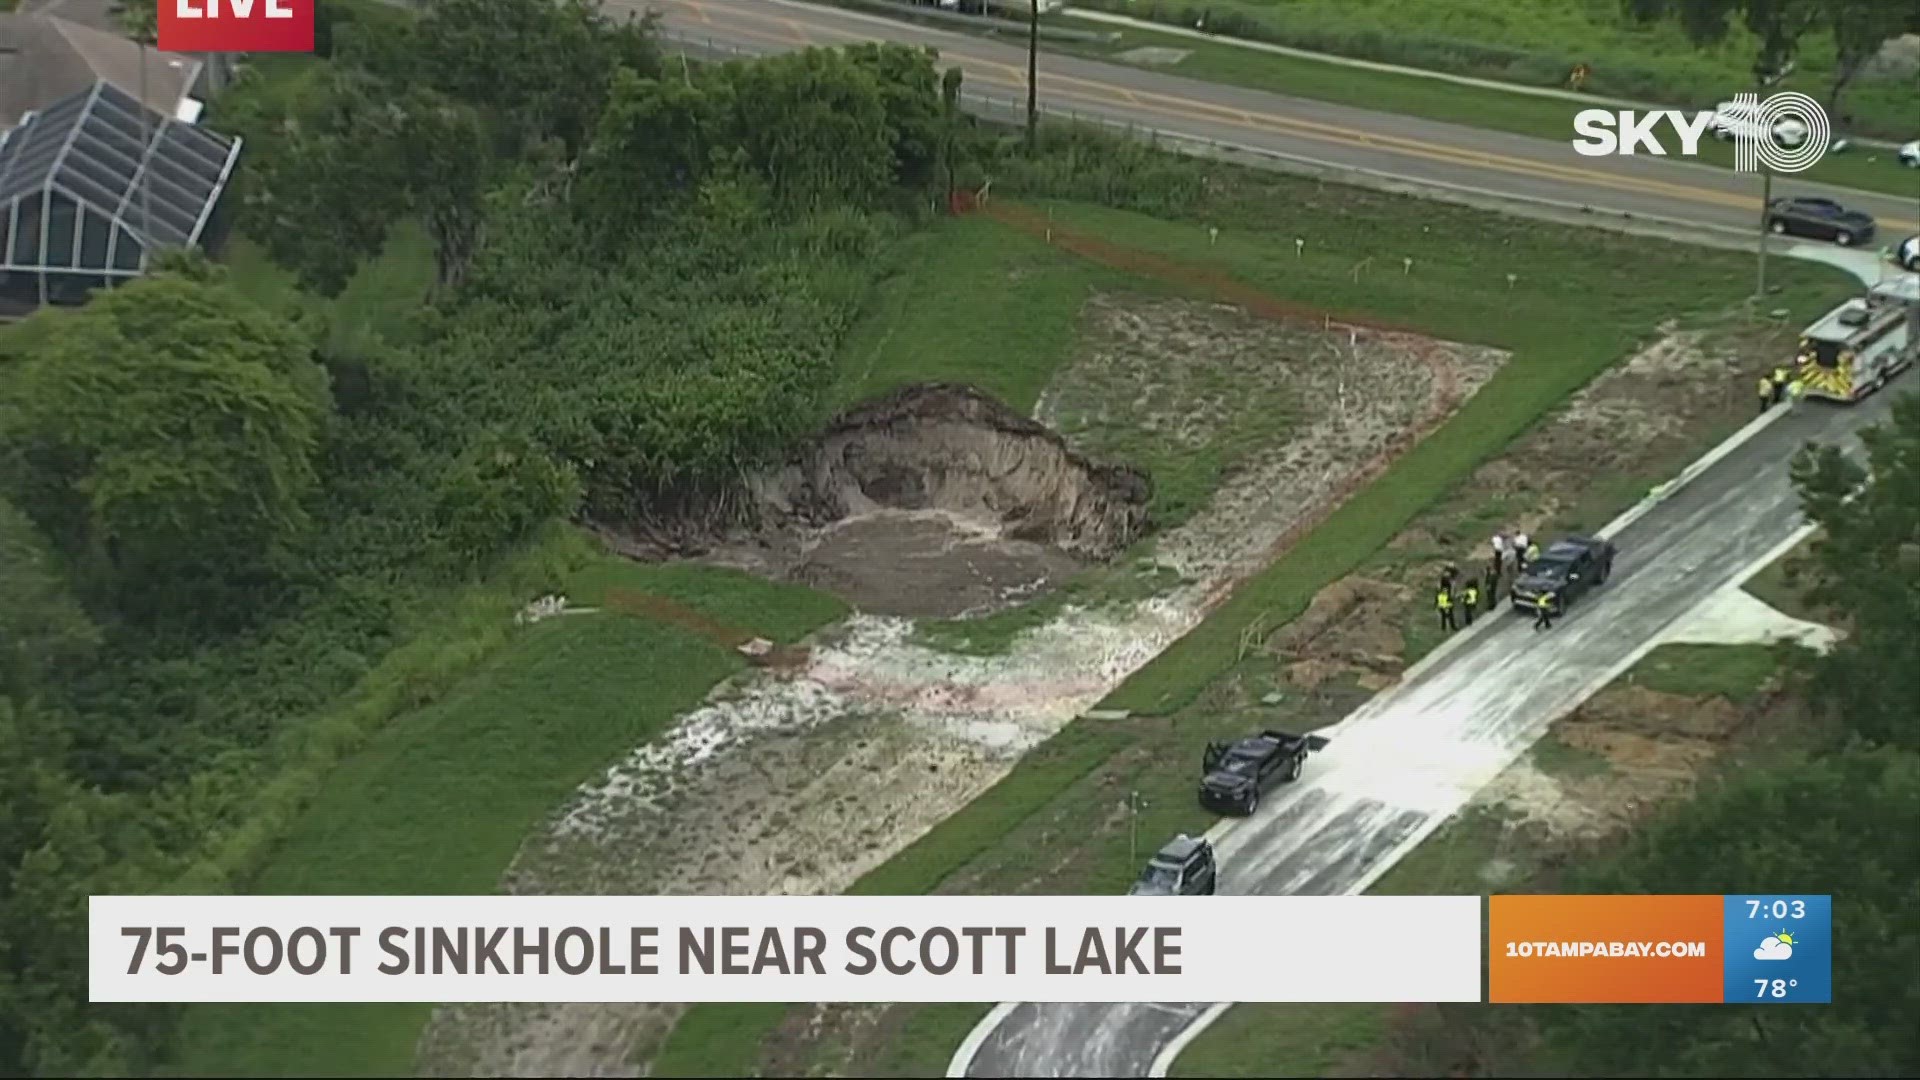 Scott Lake Road at Fitzgerald Road is closed and will be blocked off at least until midday Saturday as workers try to stop the expansion of the 75-foot sinkhole.